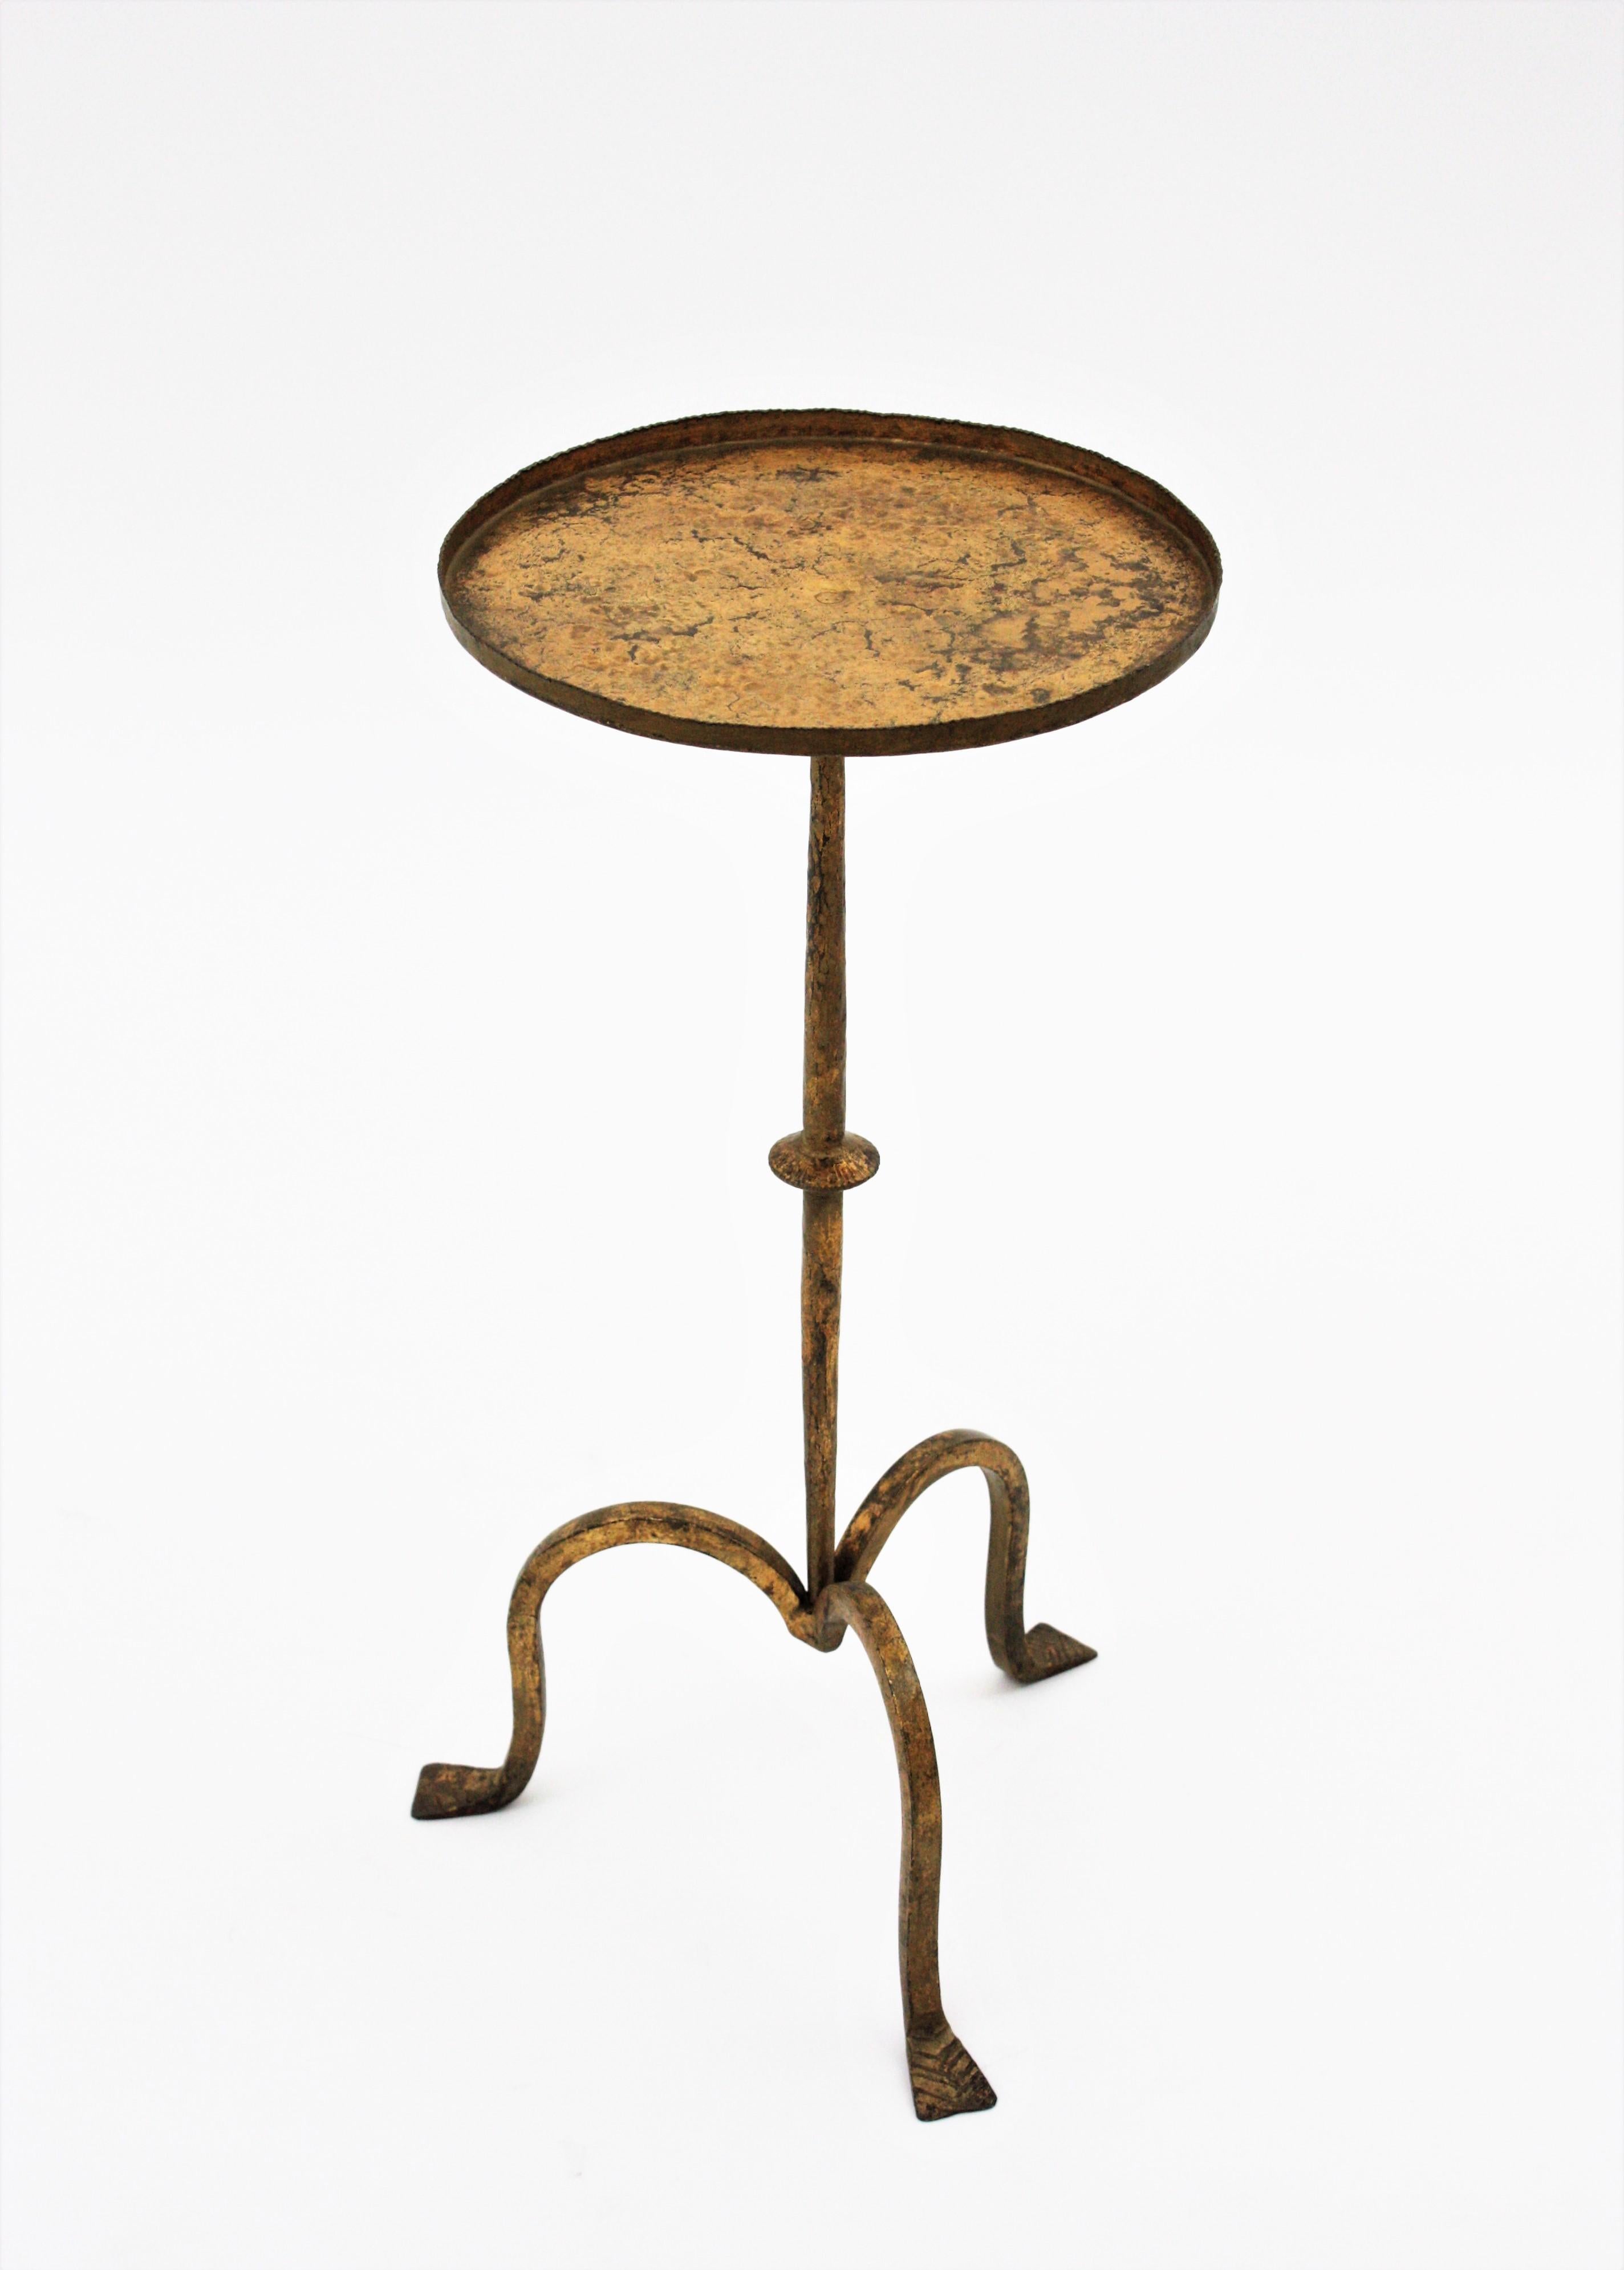 Hand-Crafted Spanish 1940s Gilt Side Table / Drinks Table / Martini Table, Wrought Iron